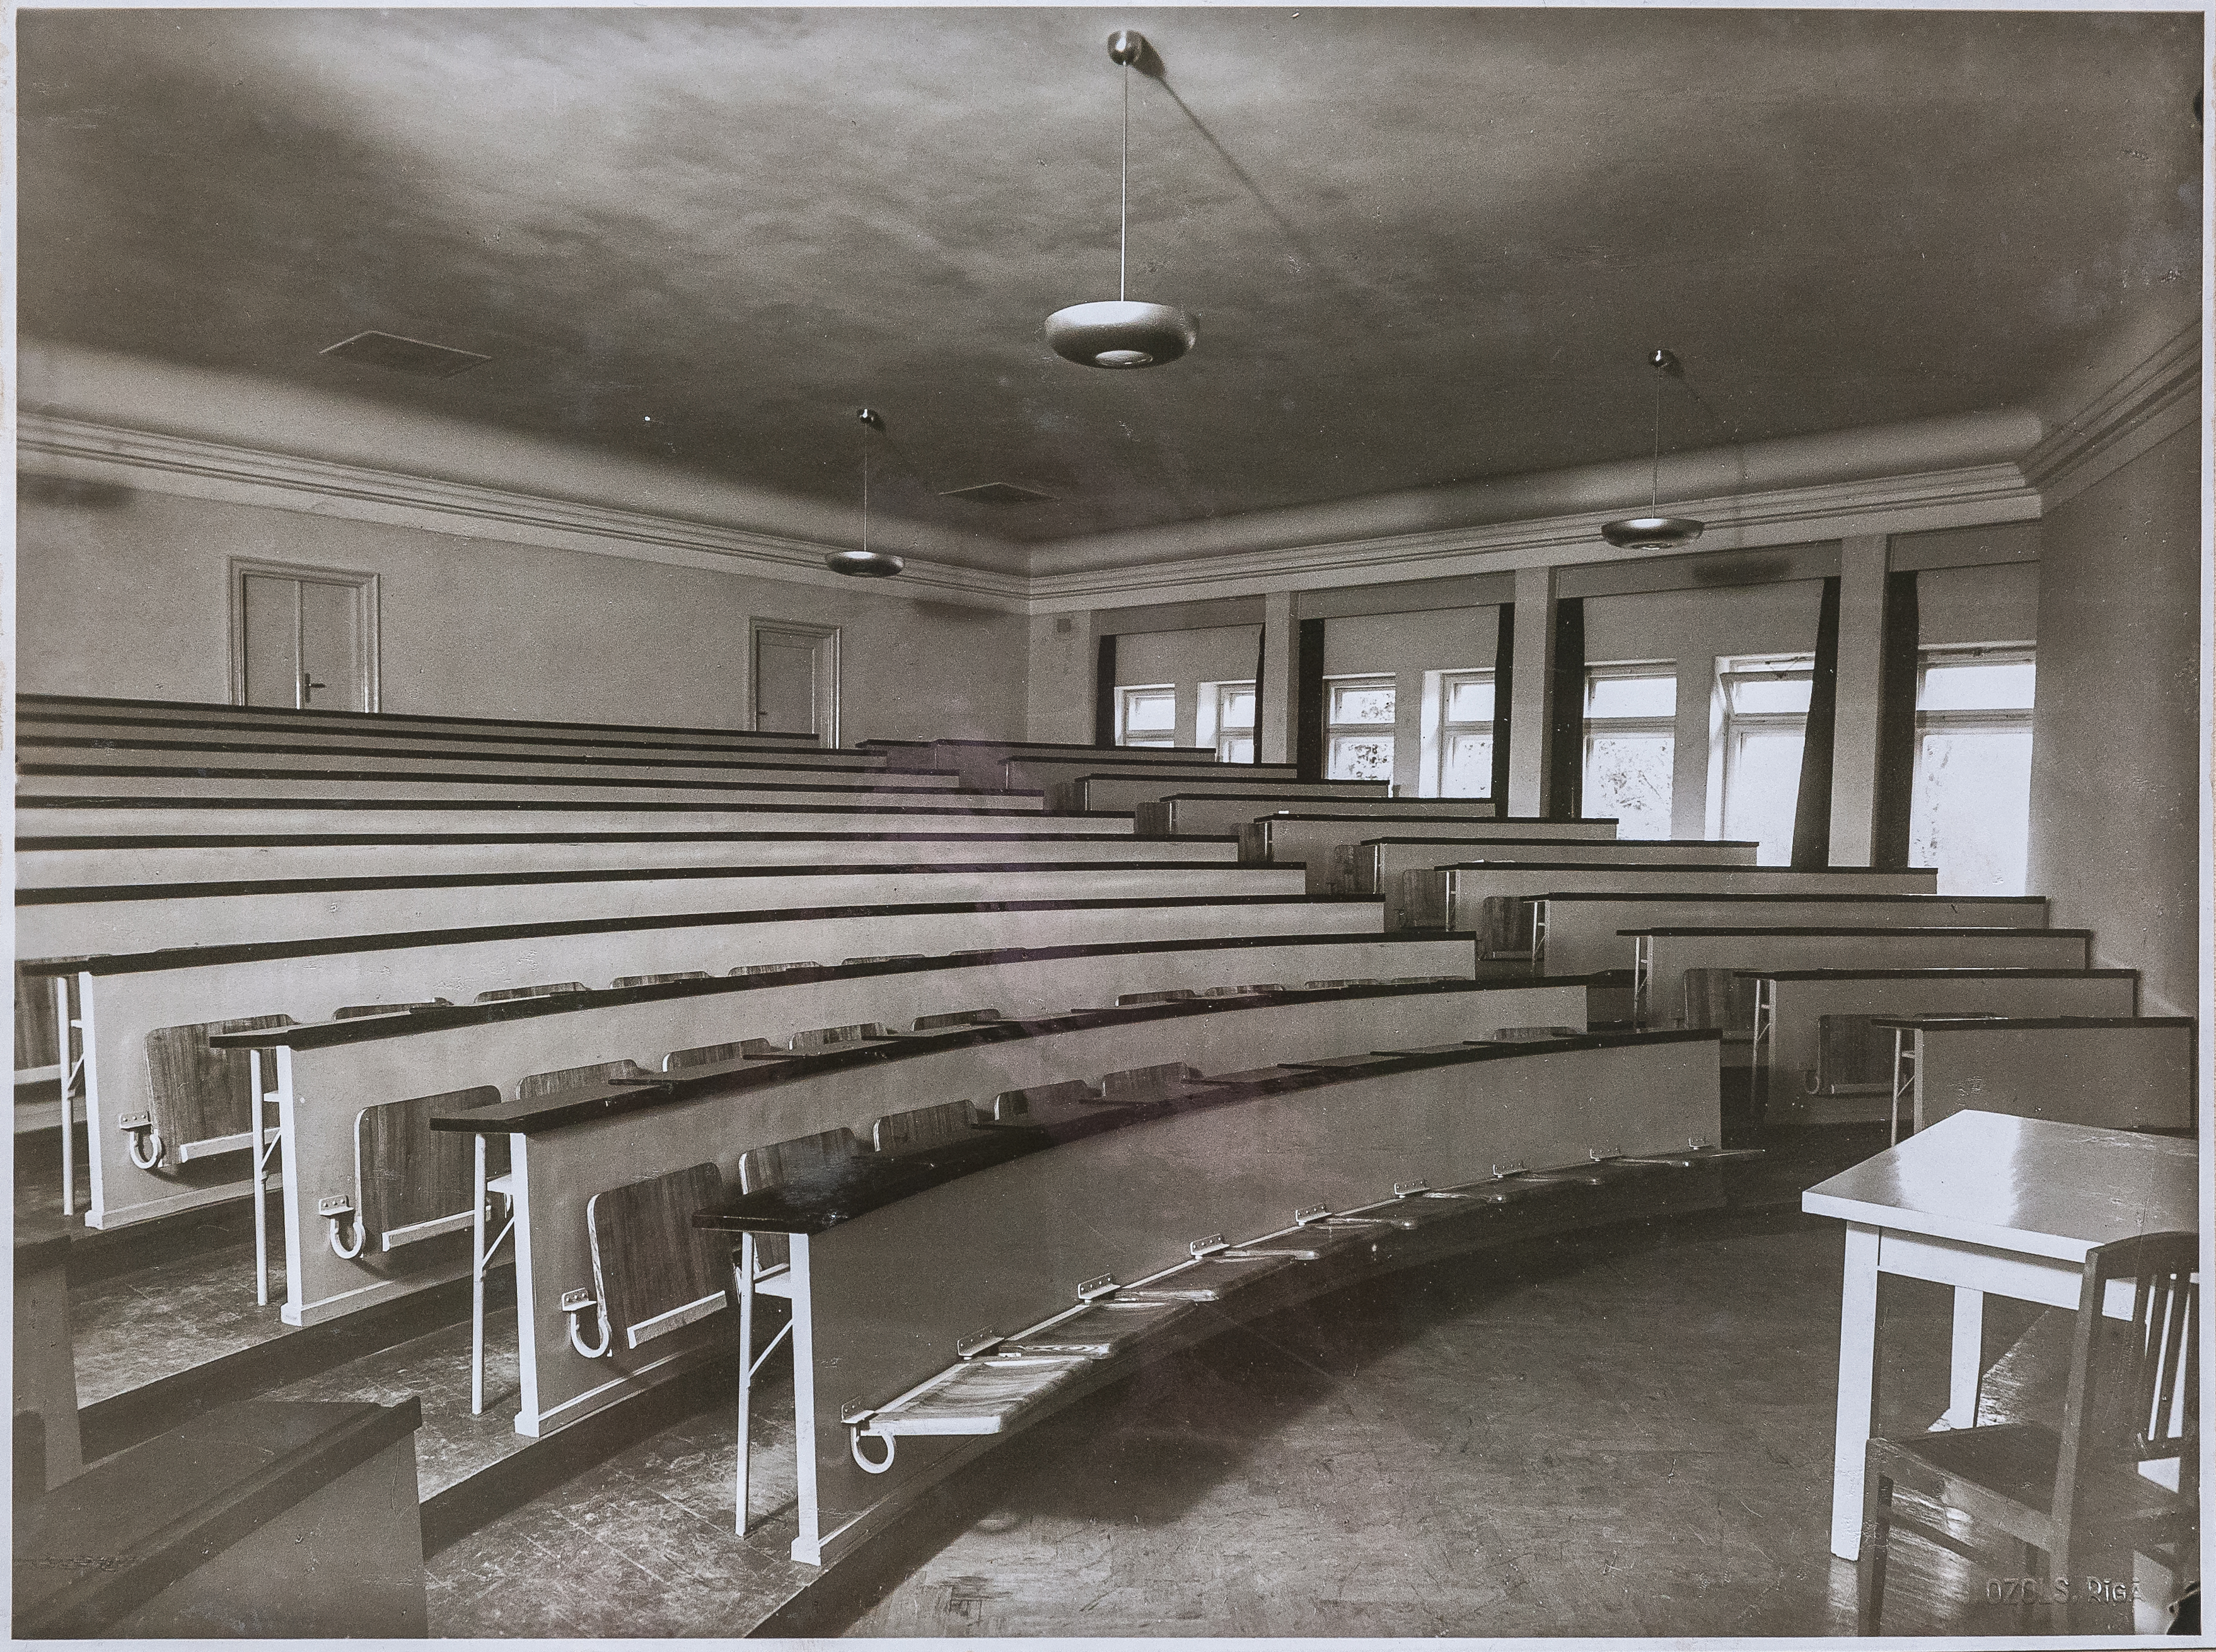 <p><b>THE LECTURE ROOM OF PHYSICS ON THE 4th FLOOR </b></p>  <p>&nbsp;</p>  <p>The lecture room of physics of the Jelgava Academy of Agriculture in the building designed by Eizens Laube.</p>  <p>&nbsp;</p>  <p><em>Photo: 1939</em></p>